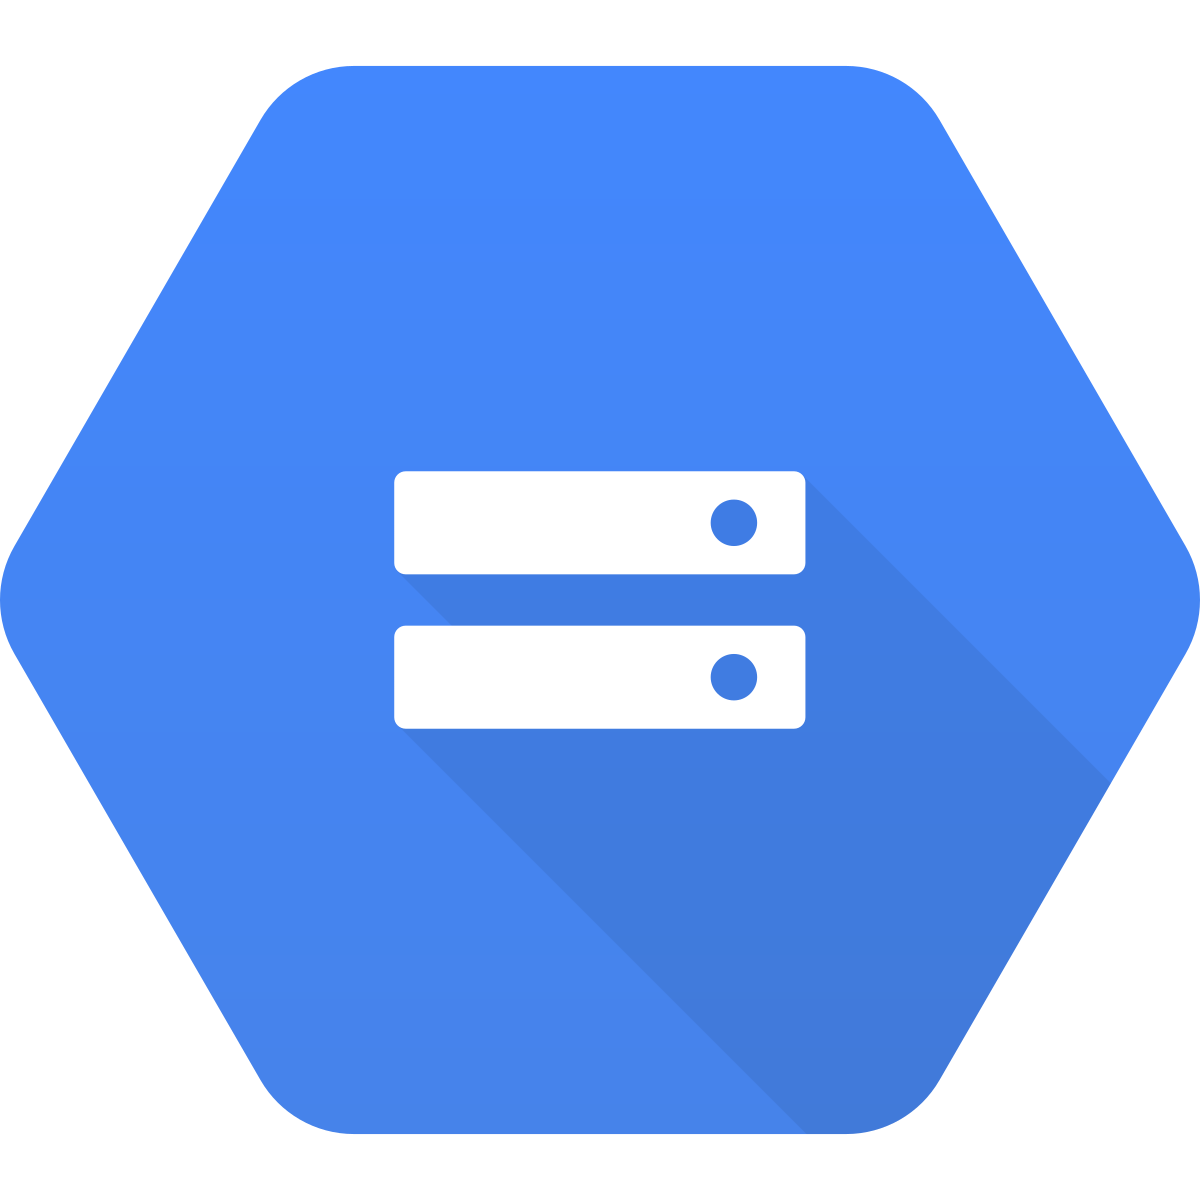 Sync data from Google Cloud Storage to Amazon SQS.